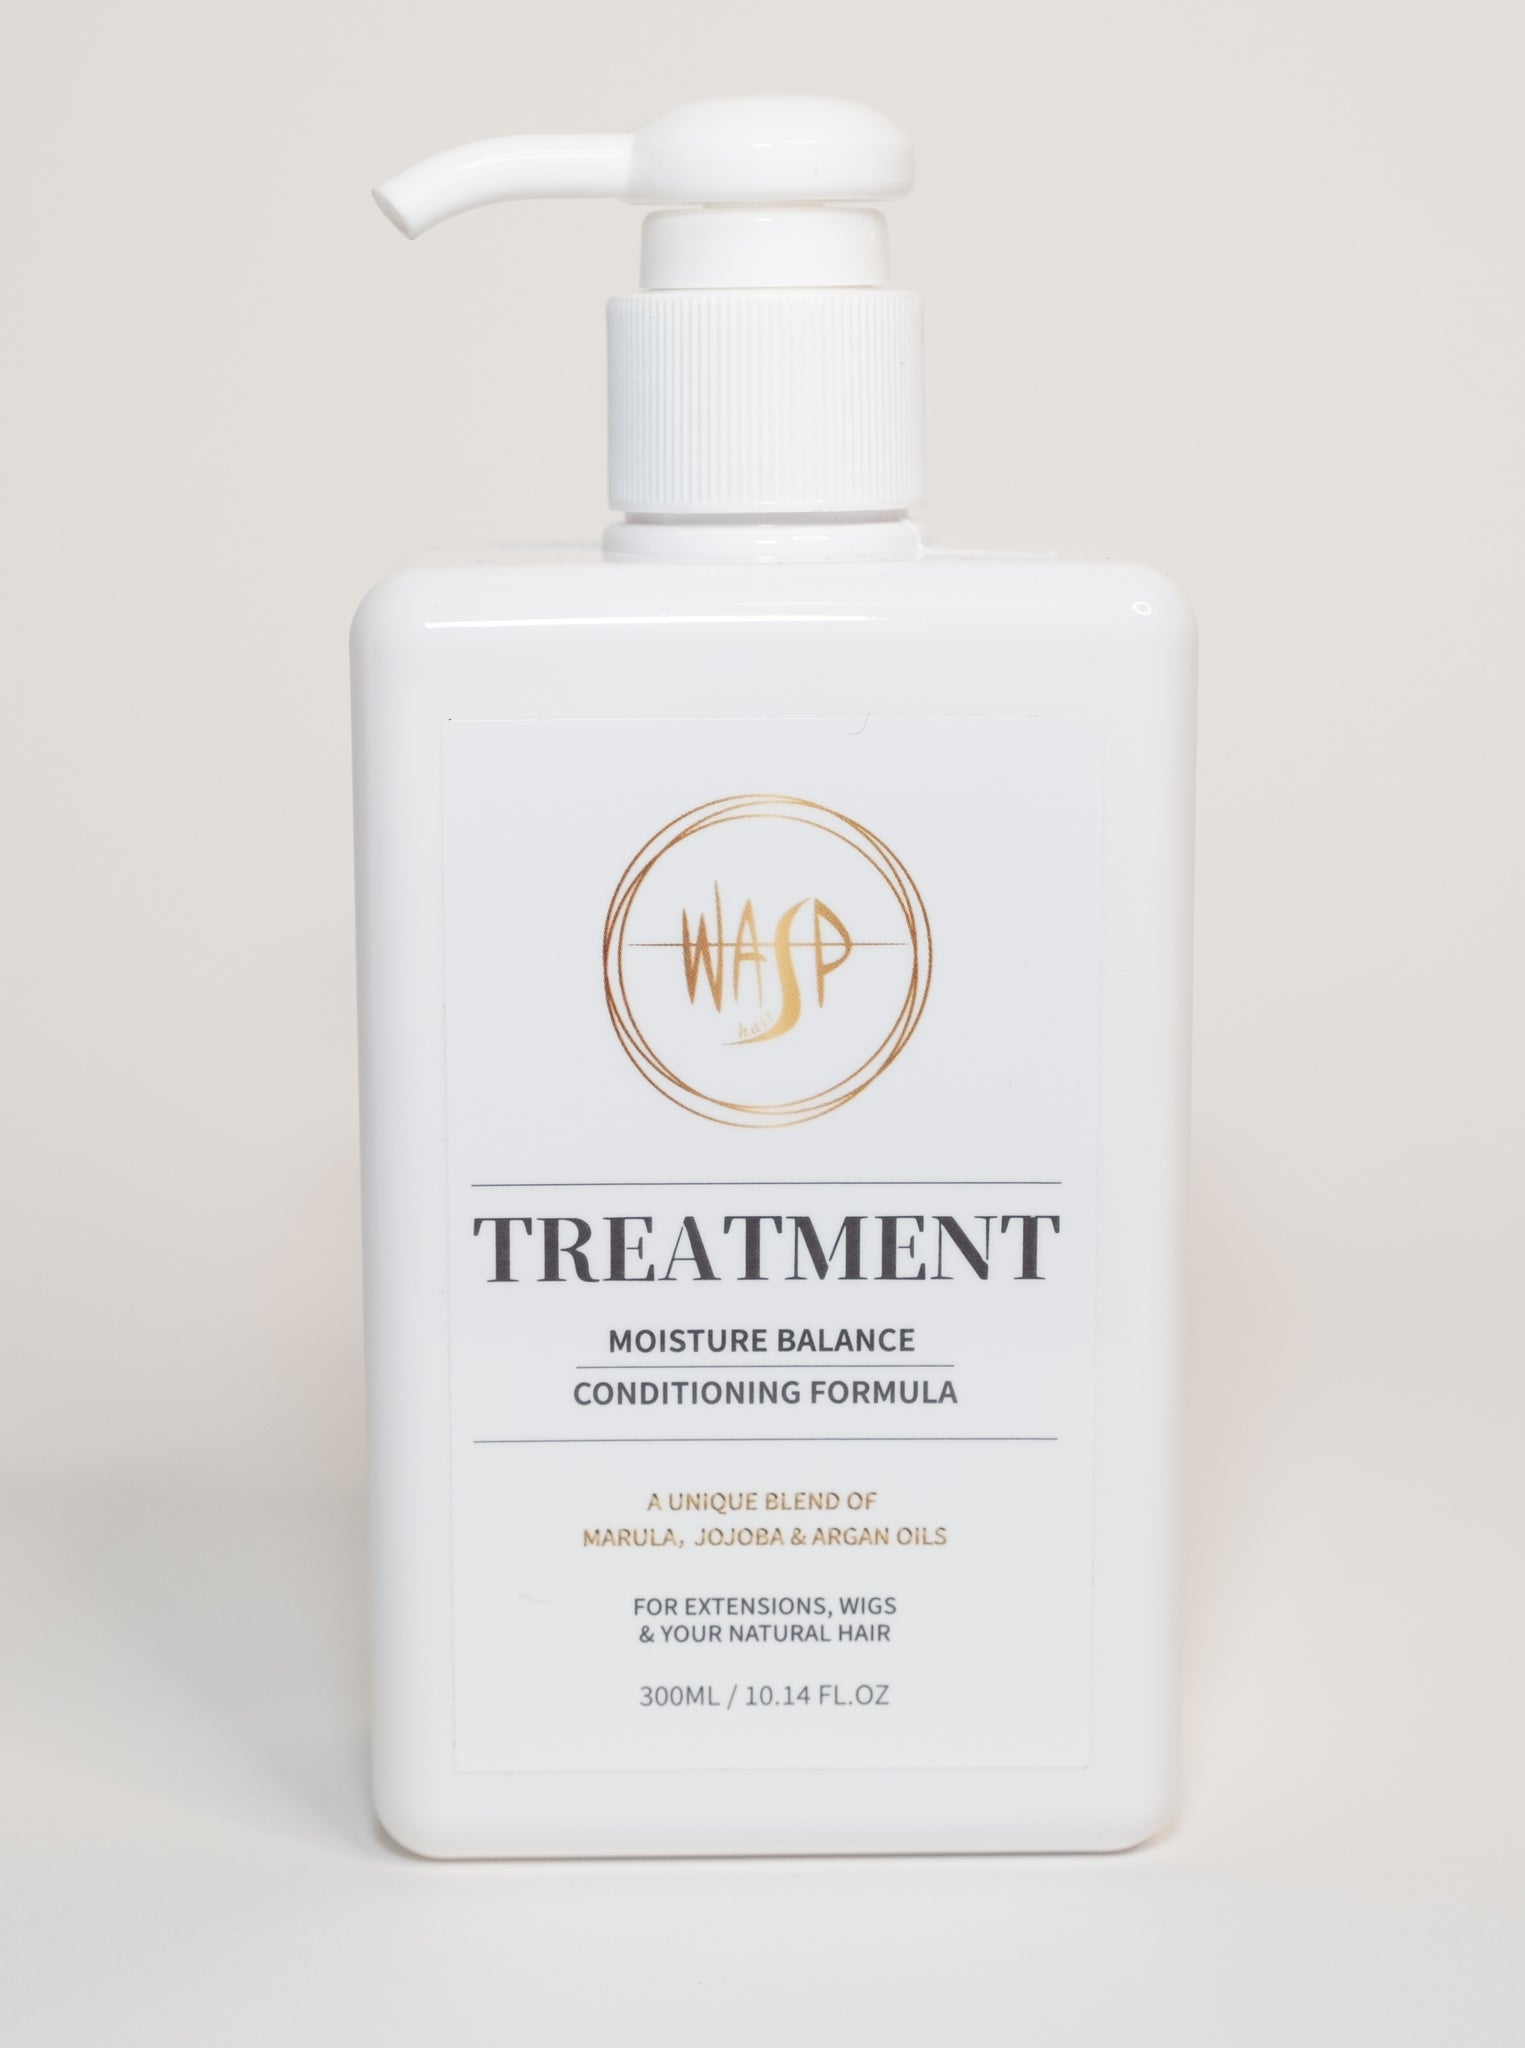 Wasp Treatment for extensions,wigs&your natural hair. (300ml/150ml)